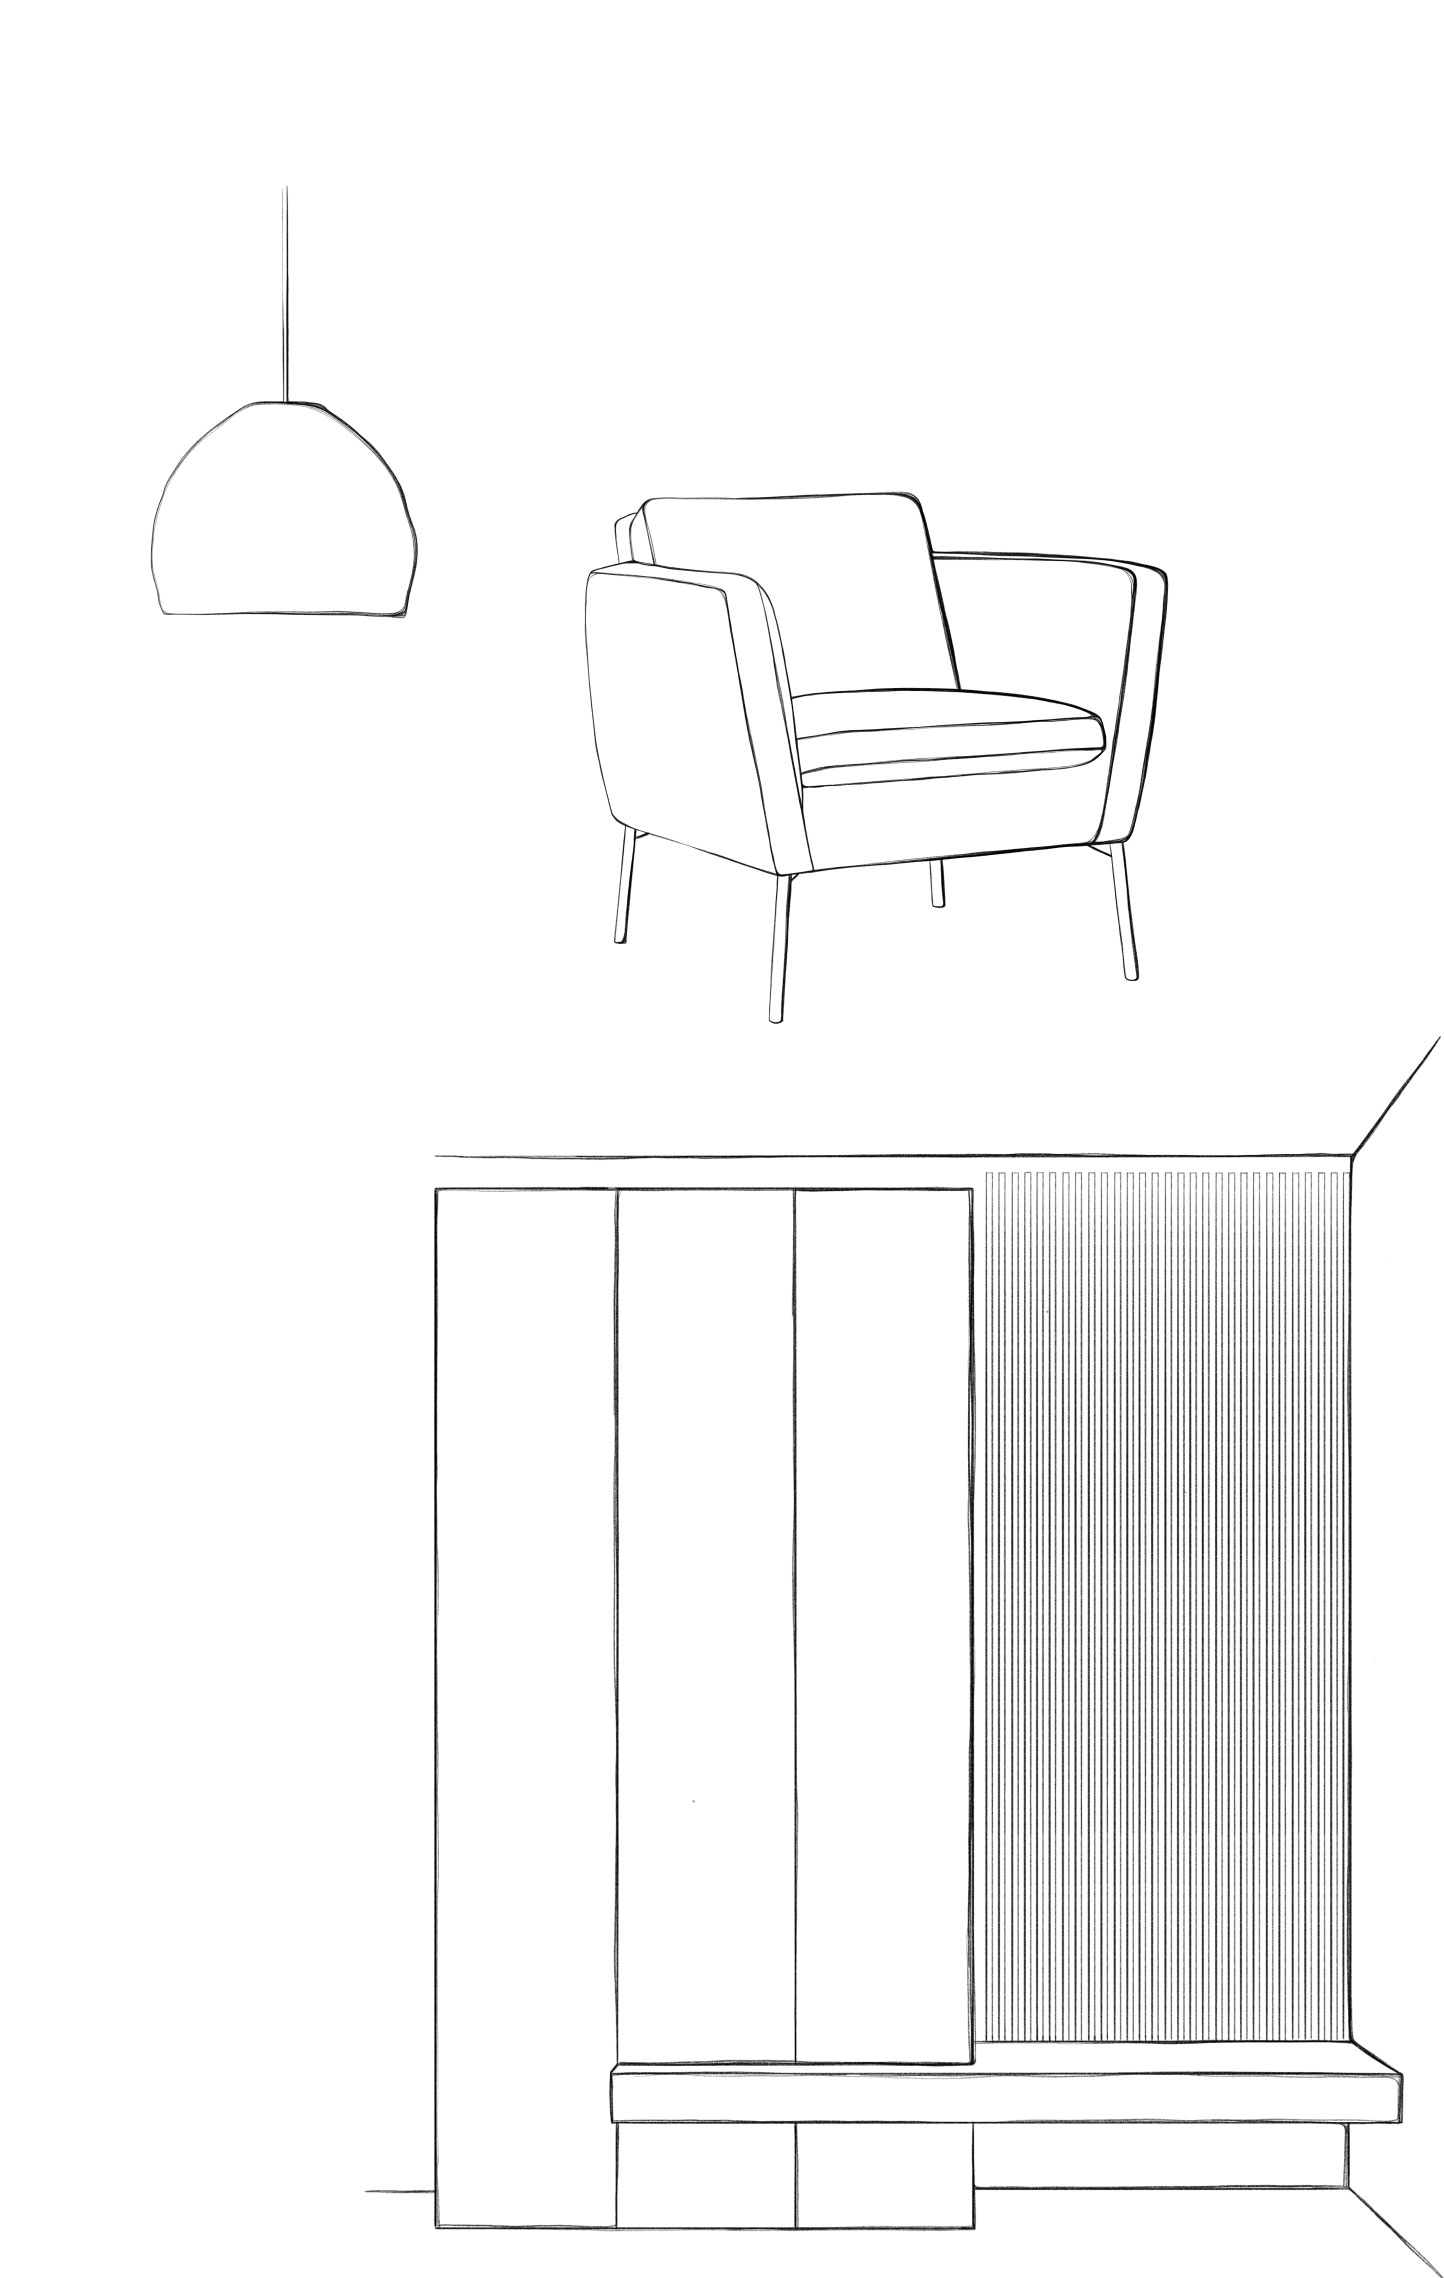 Dessin mobilier agencement